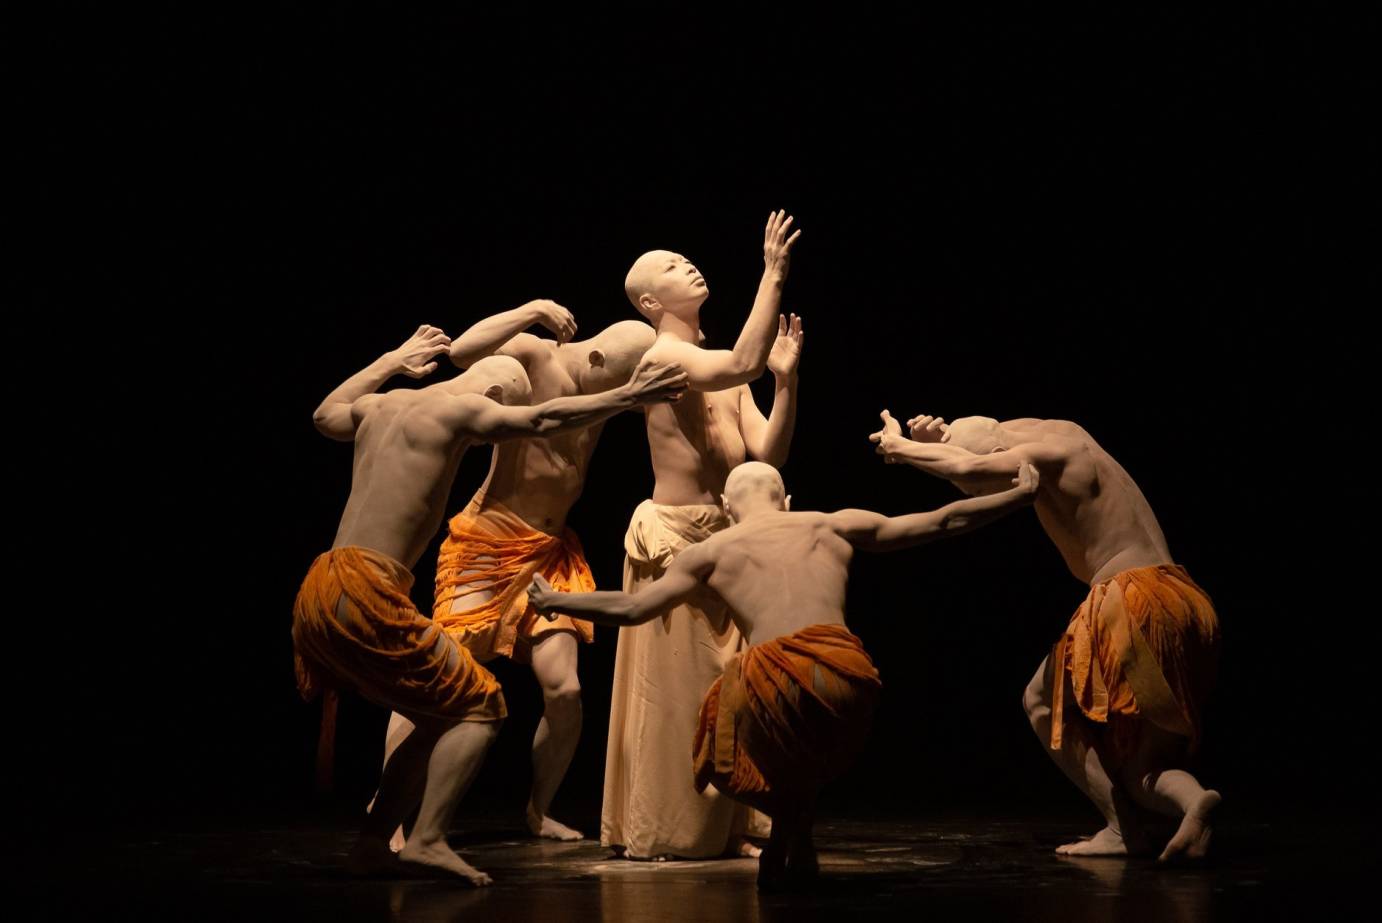 4 dancers clothed in orange cloth around their waste circle around a dancer who is reaching upwards